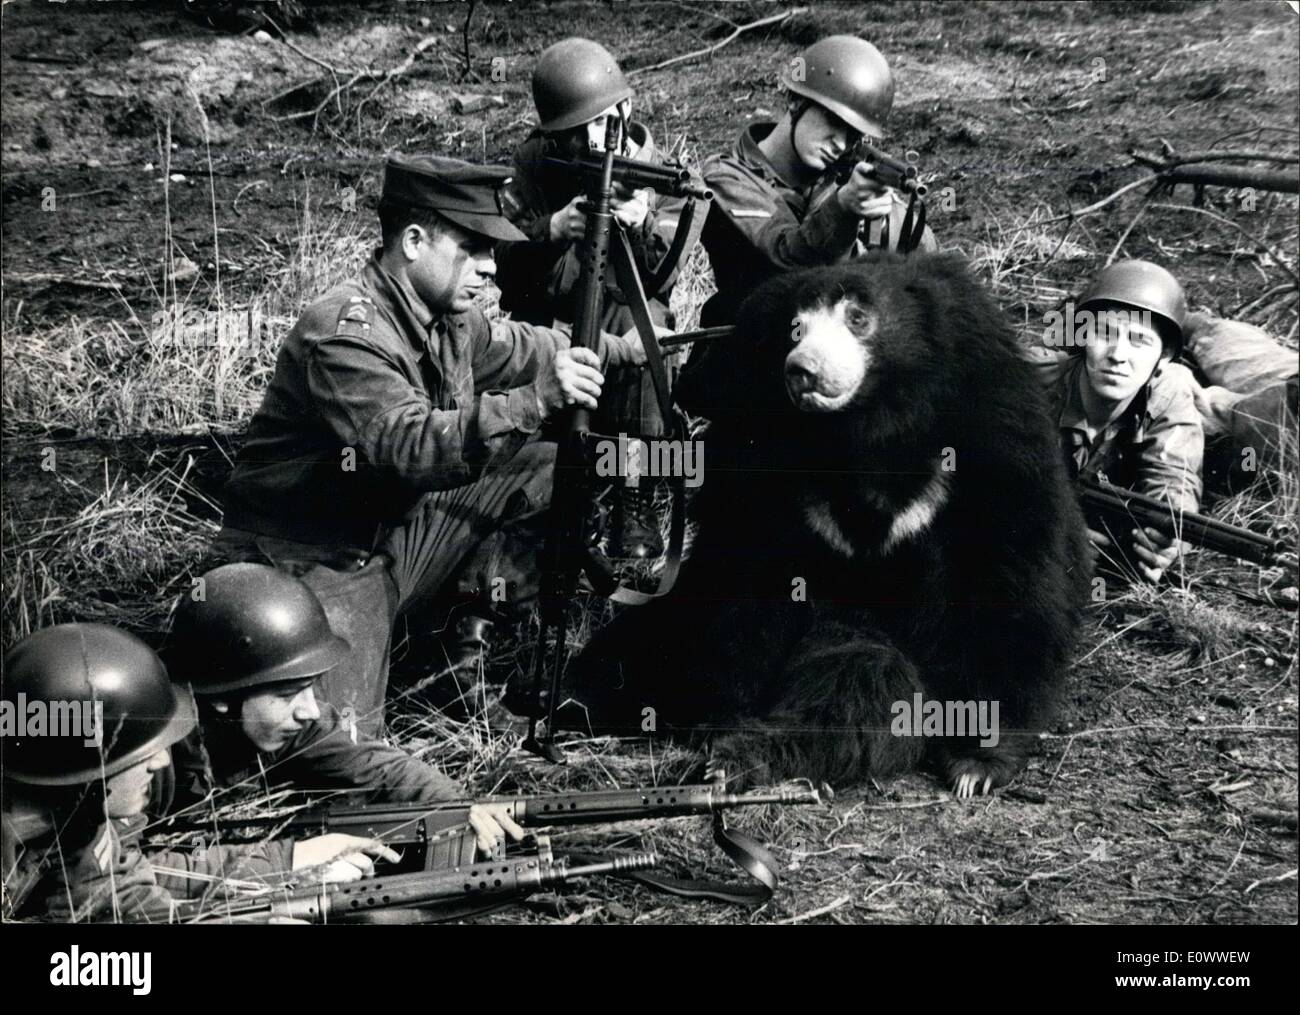 Mar. 23, 1964 - The 1.8 meter tall sloth bear in this picture is named Alfred and is the mascot of this paratrooper unit of the Stock Photo